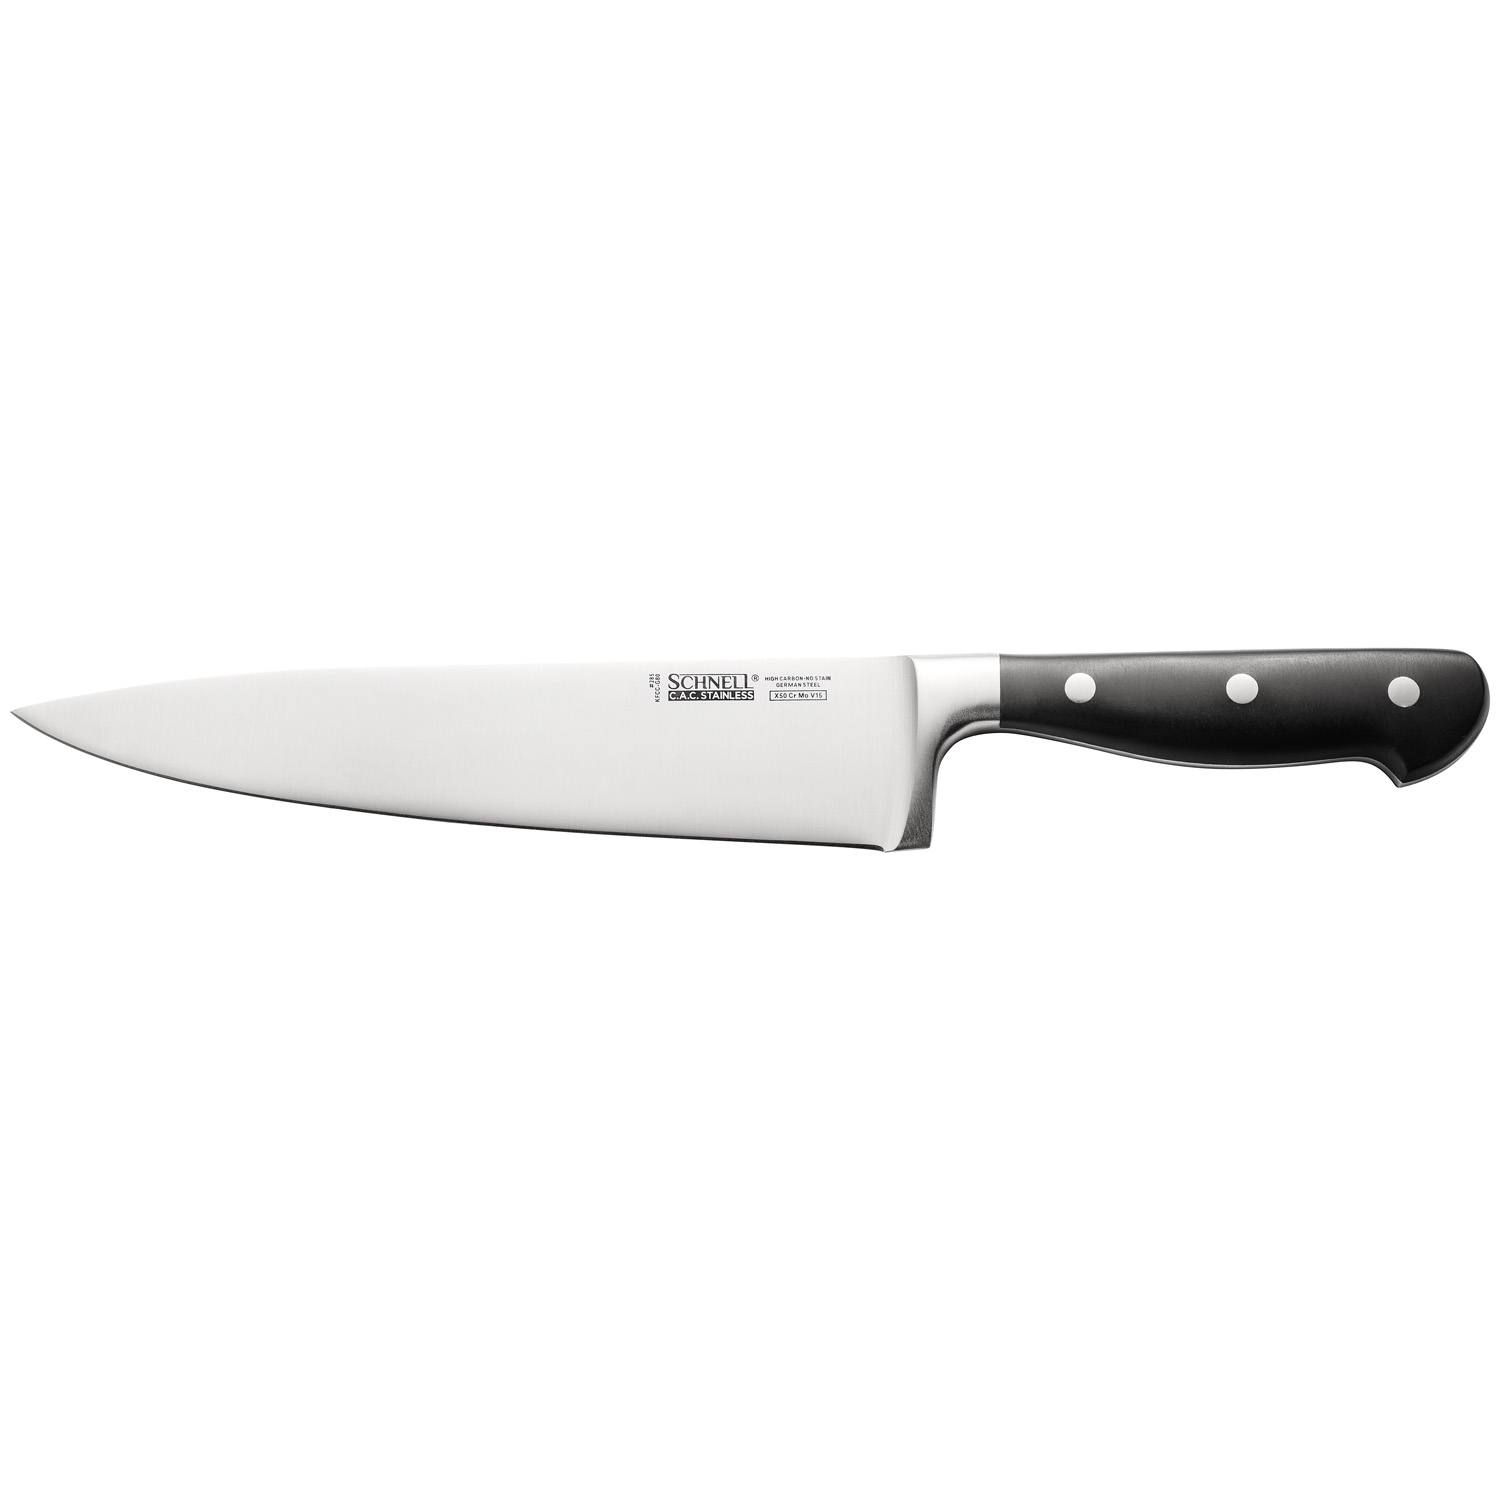 CAC China KFCC-G80 Schnell Forged Chef Knife with Black Handle 8"